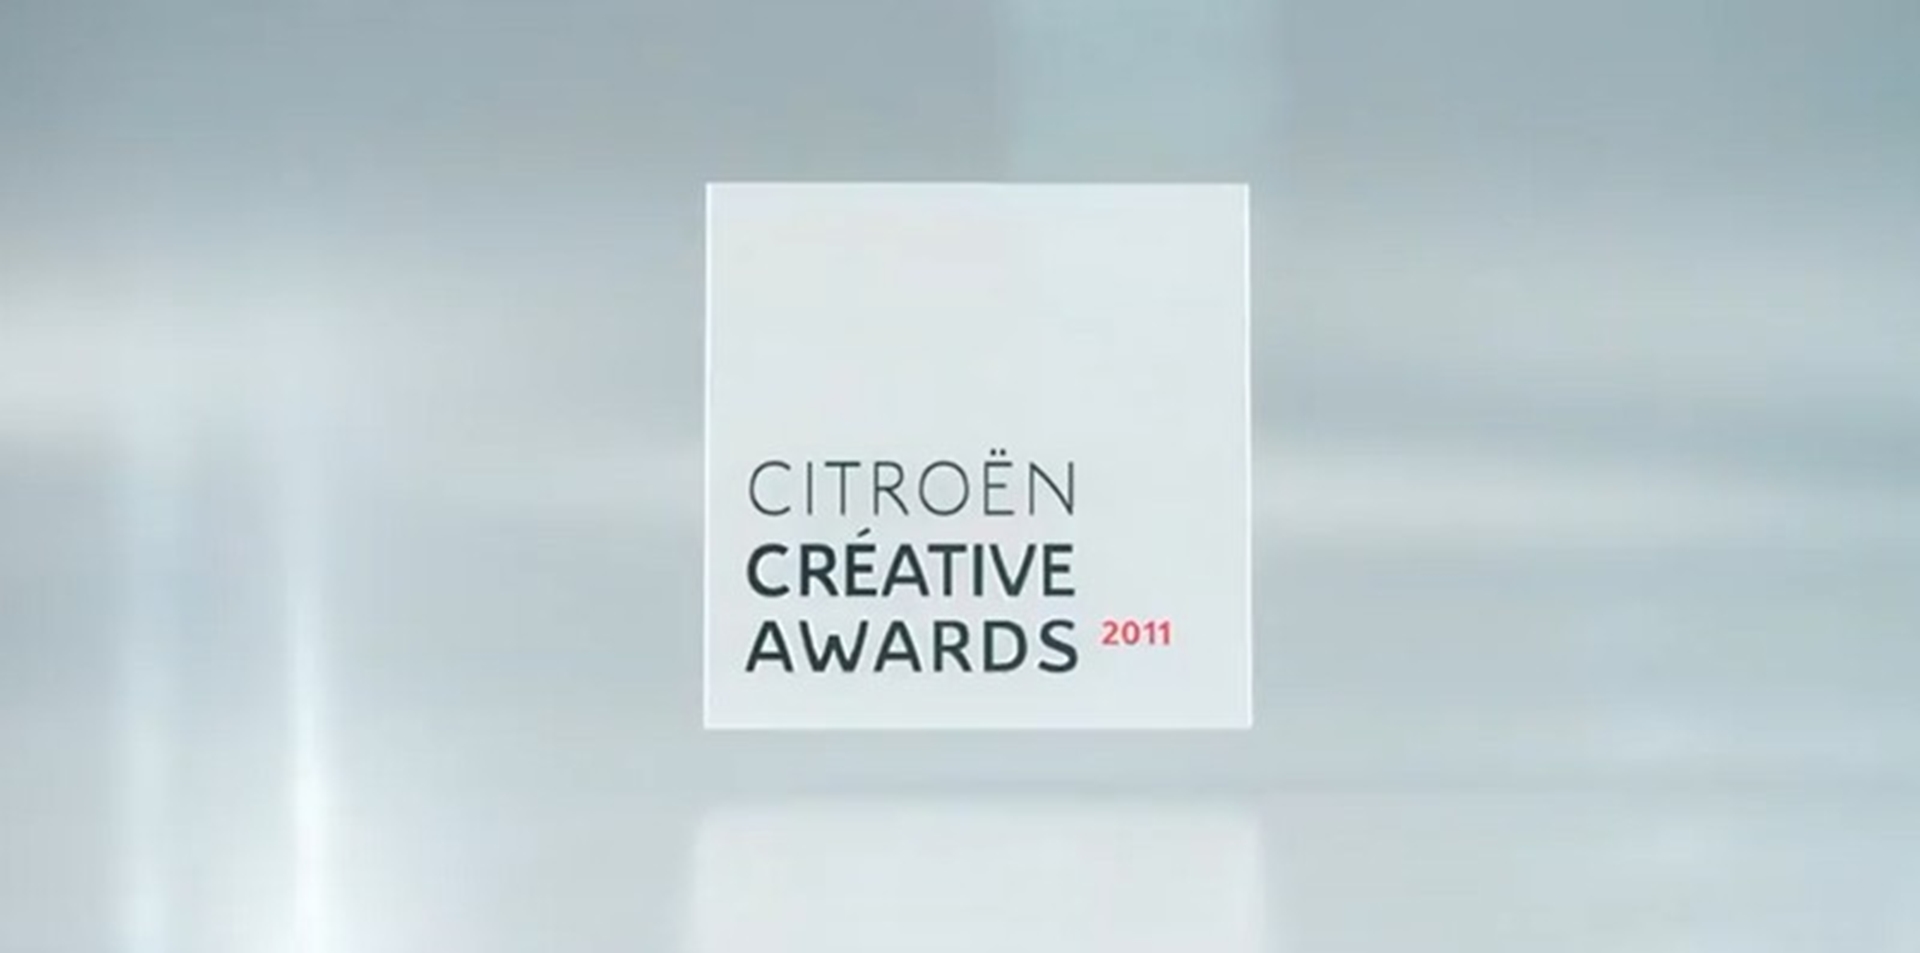 FIRST ENTRIES FOR THE CITROËN CRÉATIVE AWARDS POSTED ONLINE